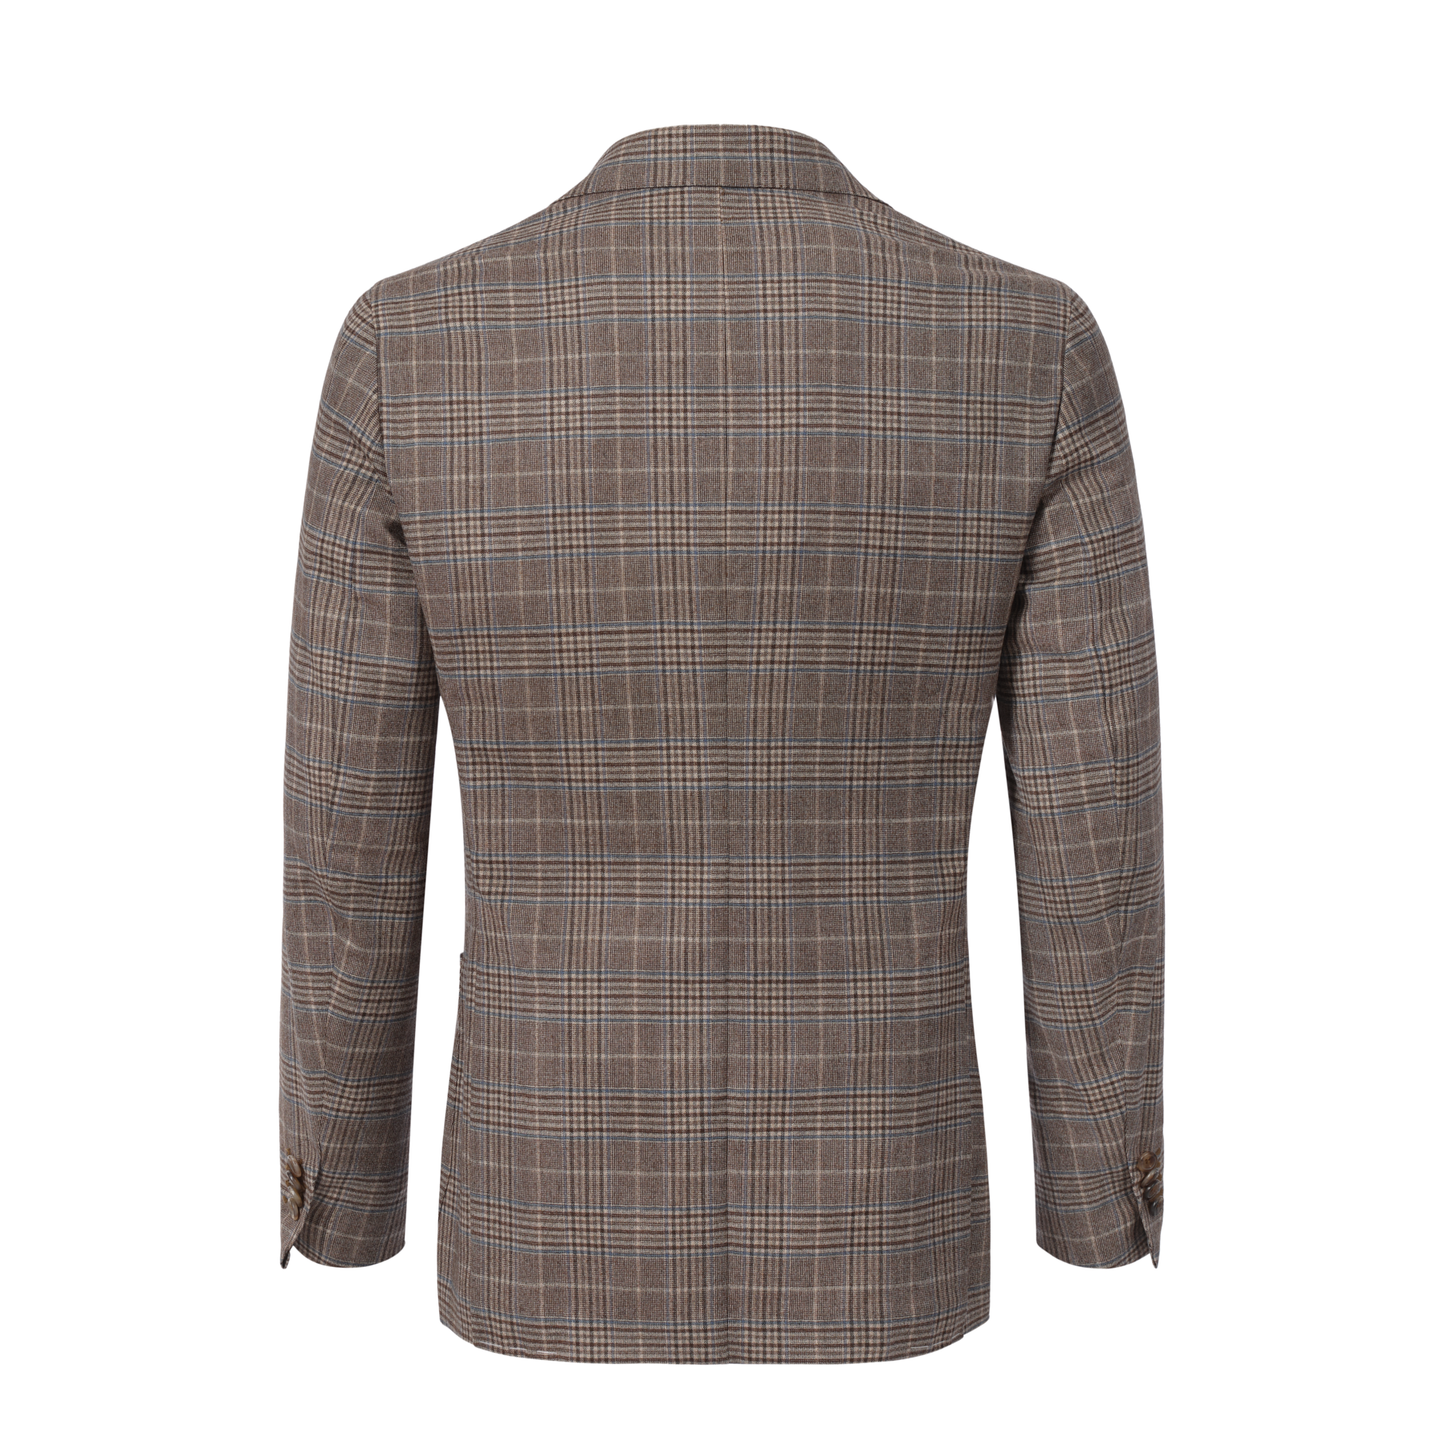 De Petrillo Single-Breasted Glencheck Wool Jacket in Brown. Exclusively ...